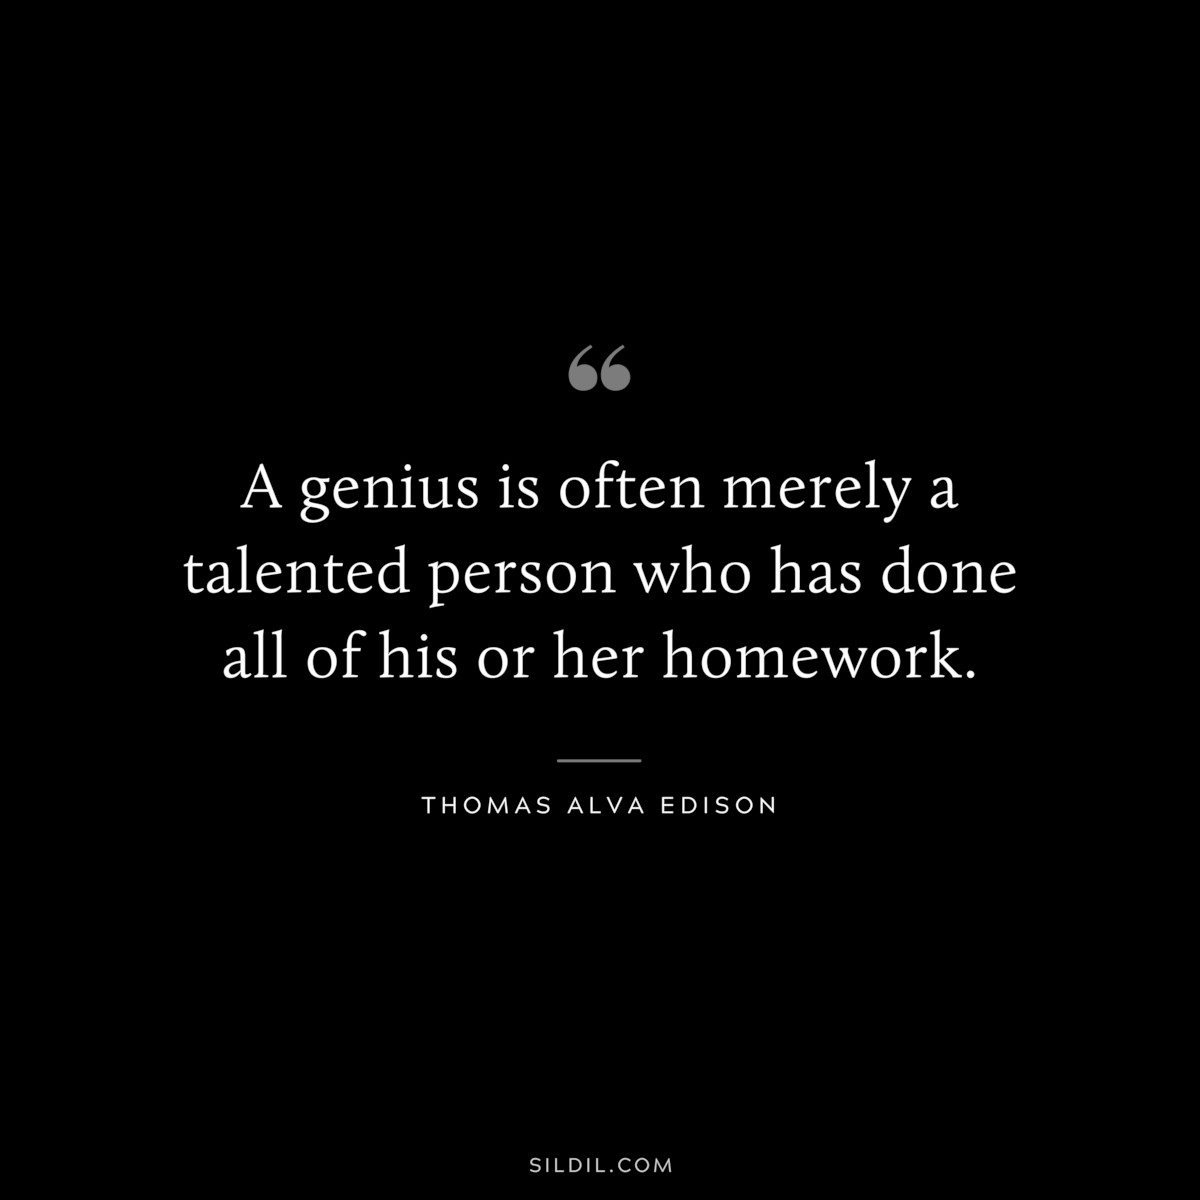 A genius is often merely a talented person who has done all of his or her homework. ― Thomas Alva Edison